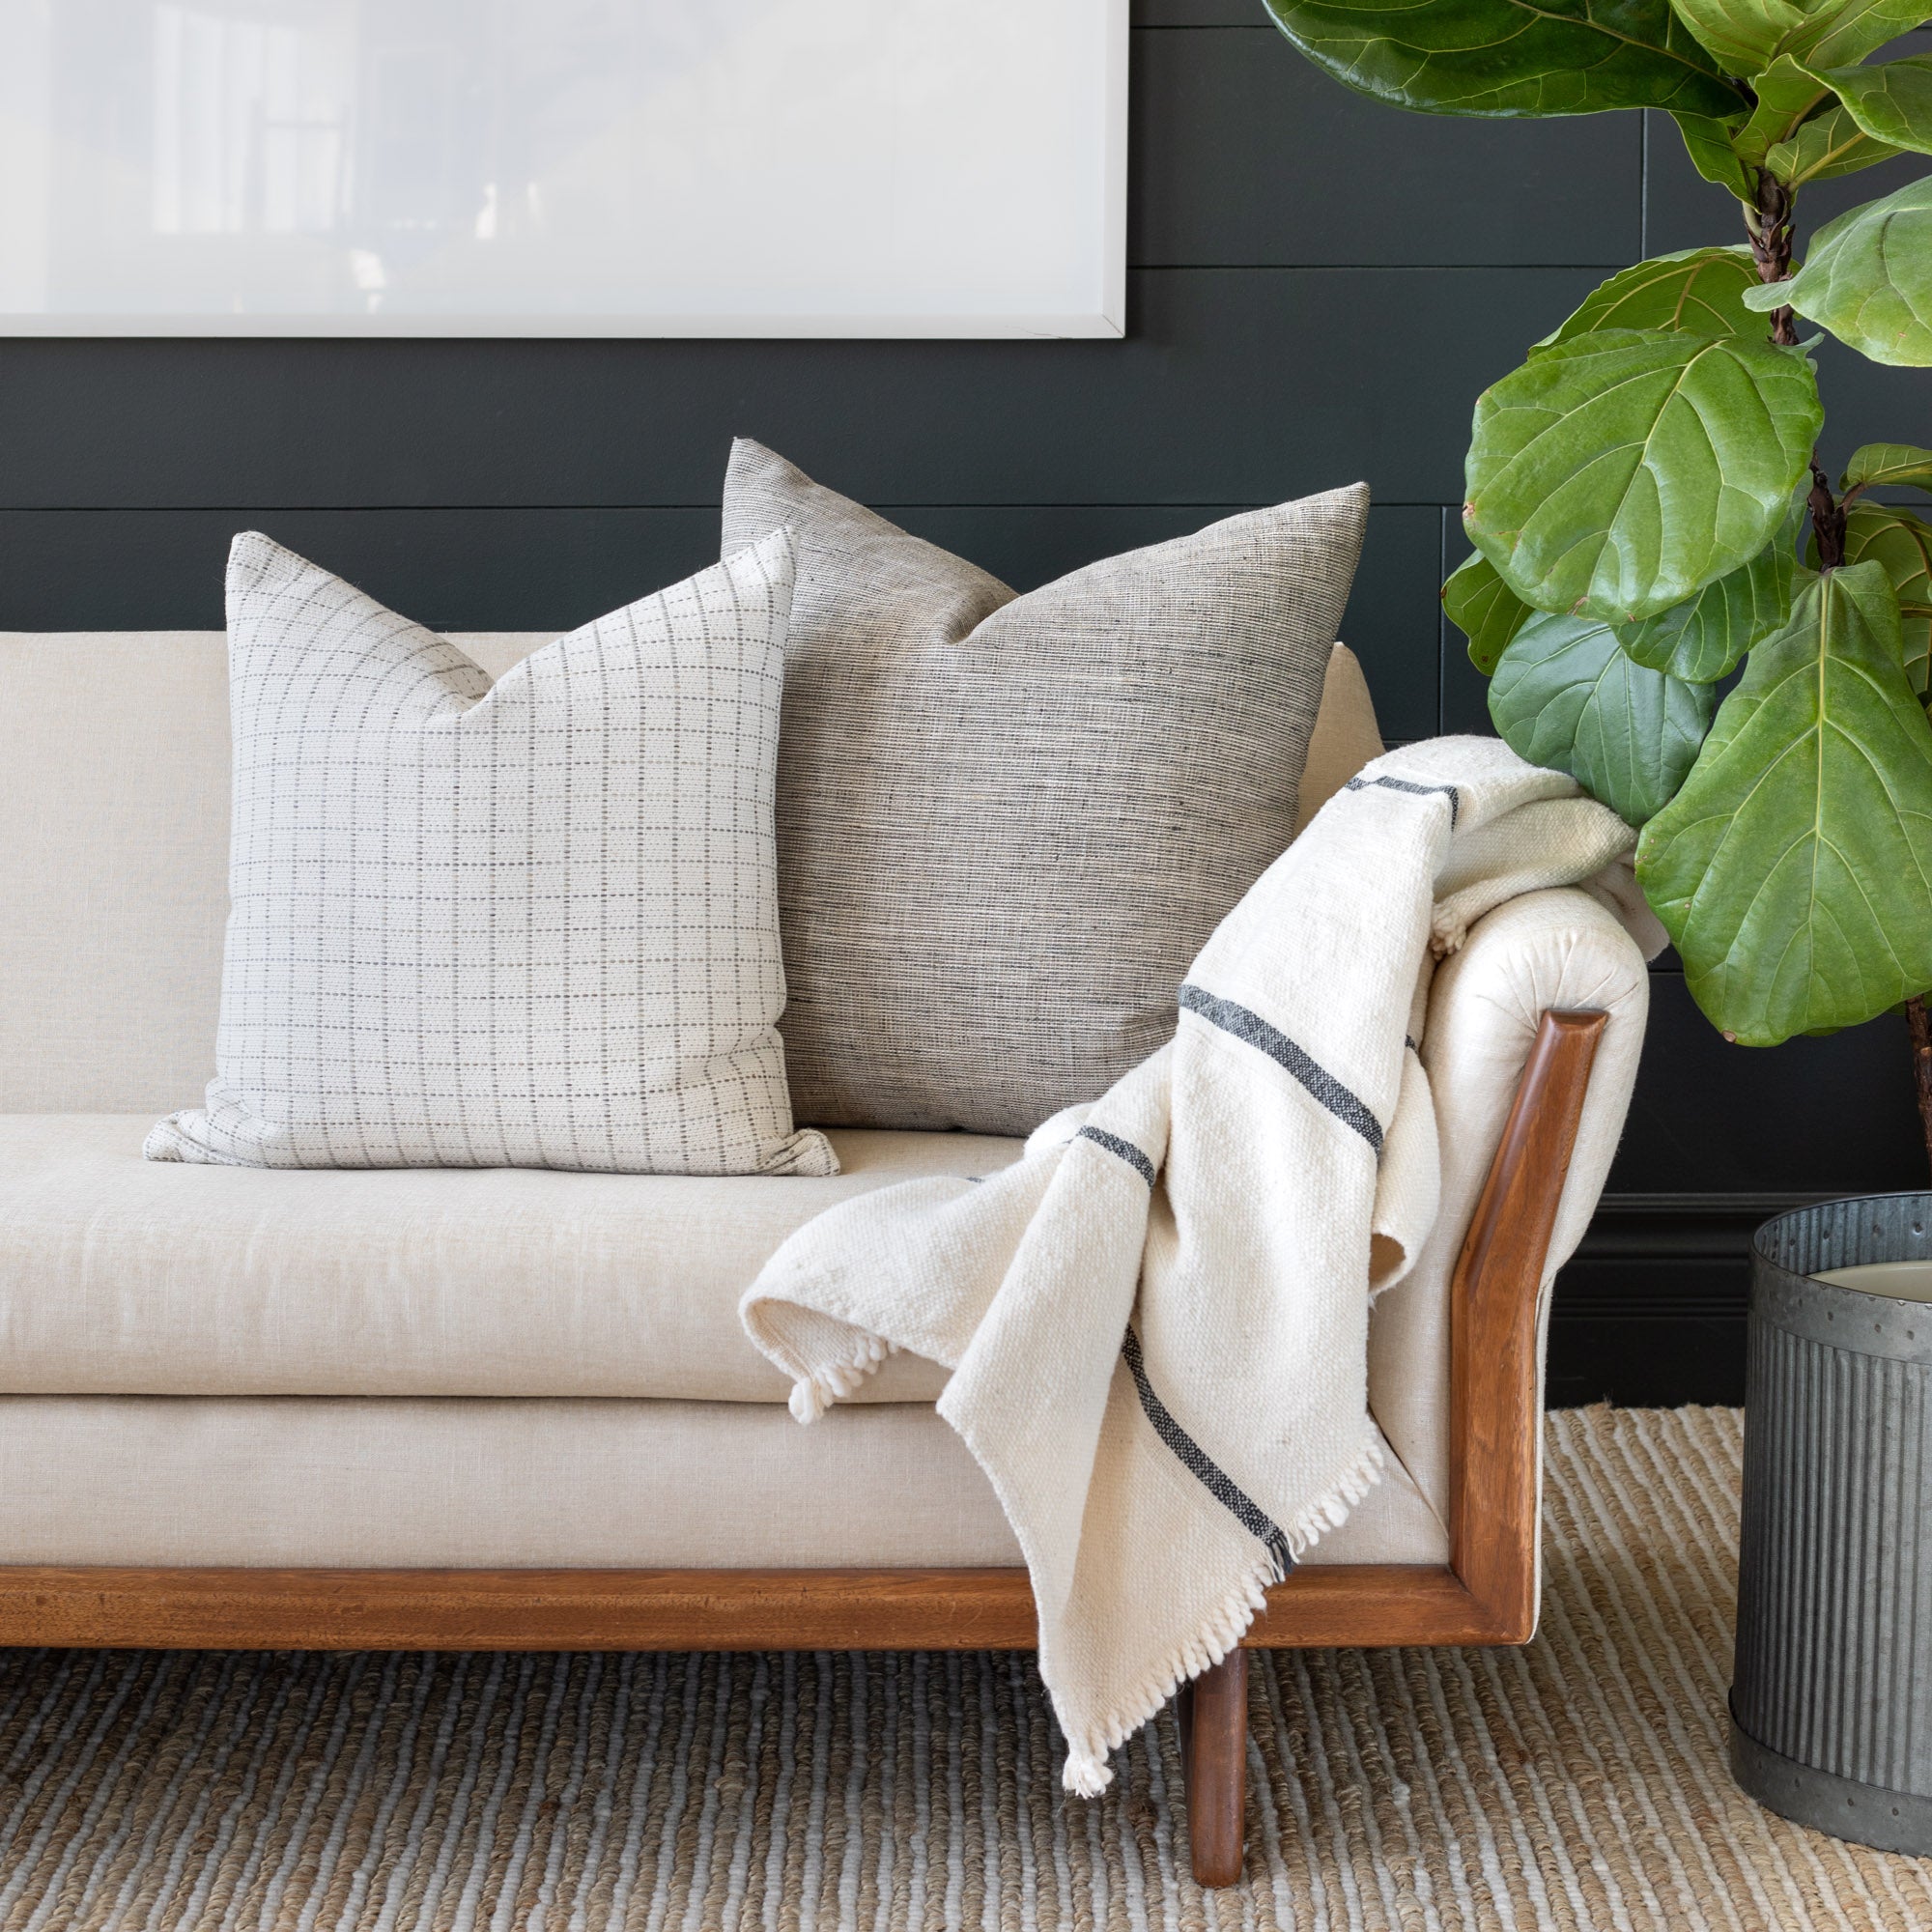 Neutral Sofa Vignette: Keely Check Birch and Stanhope Ash pillow and Rafael Cream throw blanket